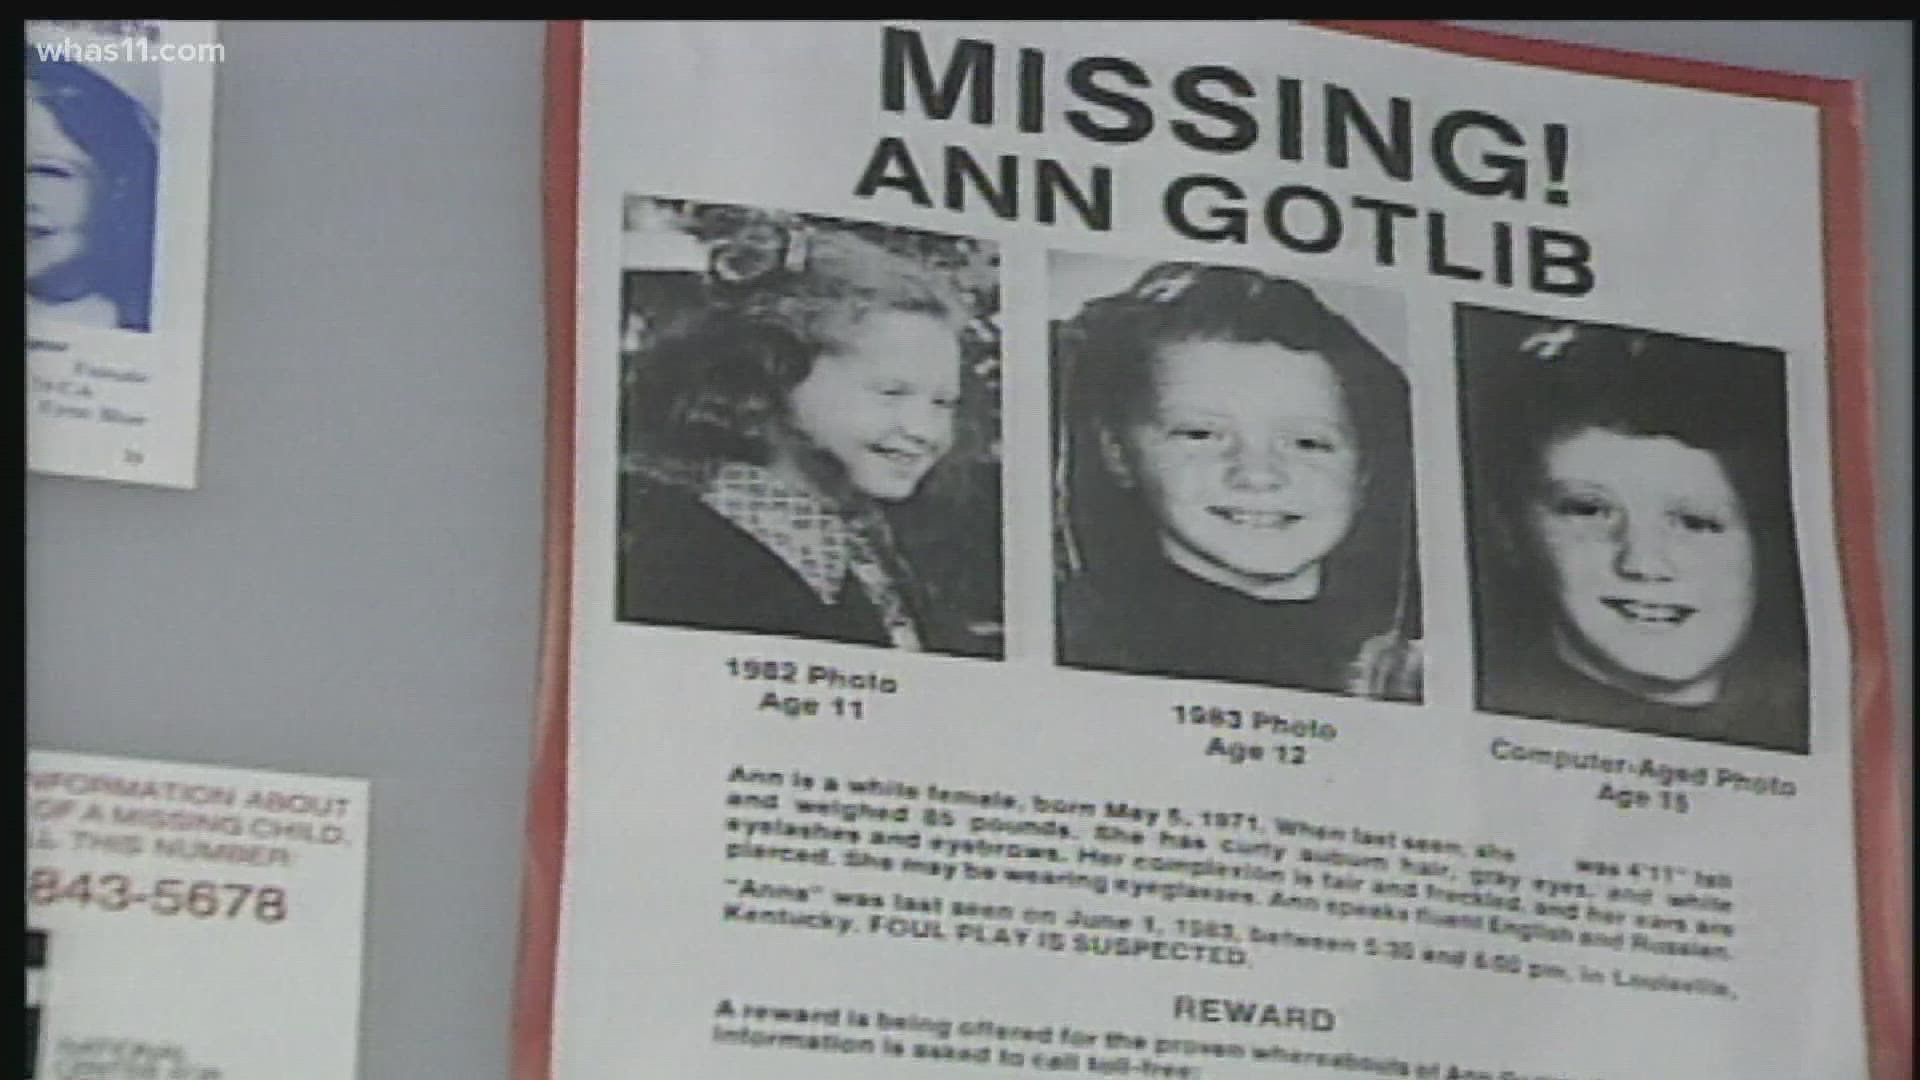 12-year-old Ann Gotlib disappeared in 1983. WHAS11 FOCUS team has exclusive never-before-released police files after a 3-year legal battle.